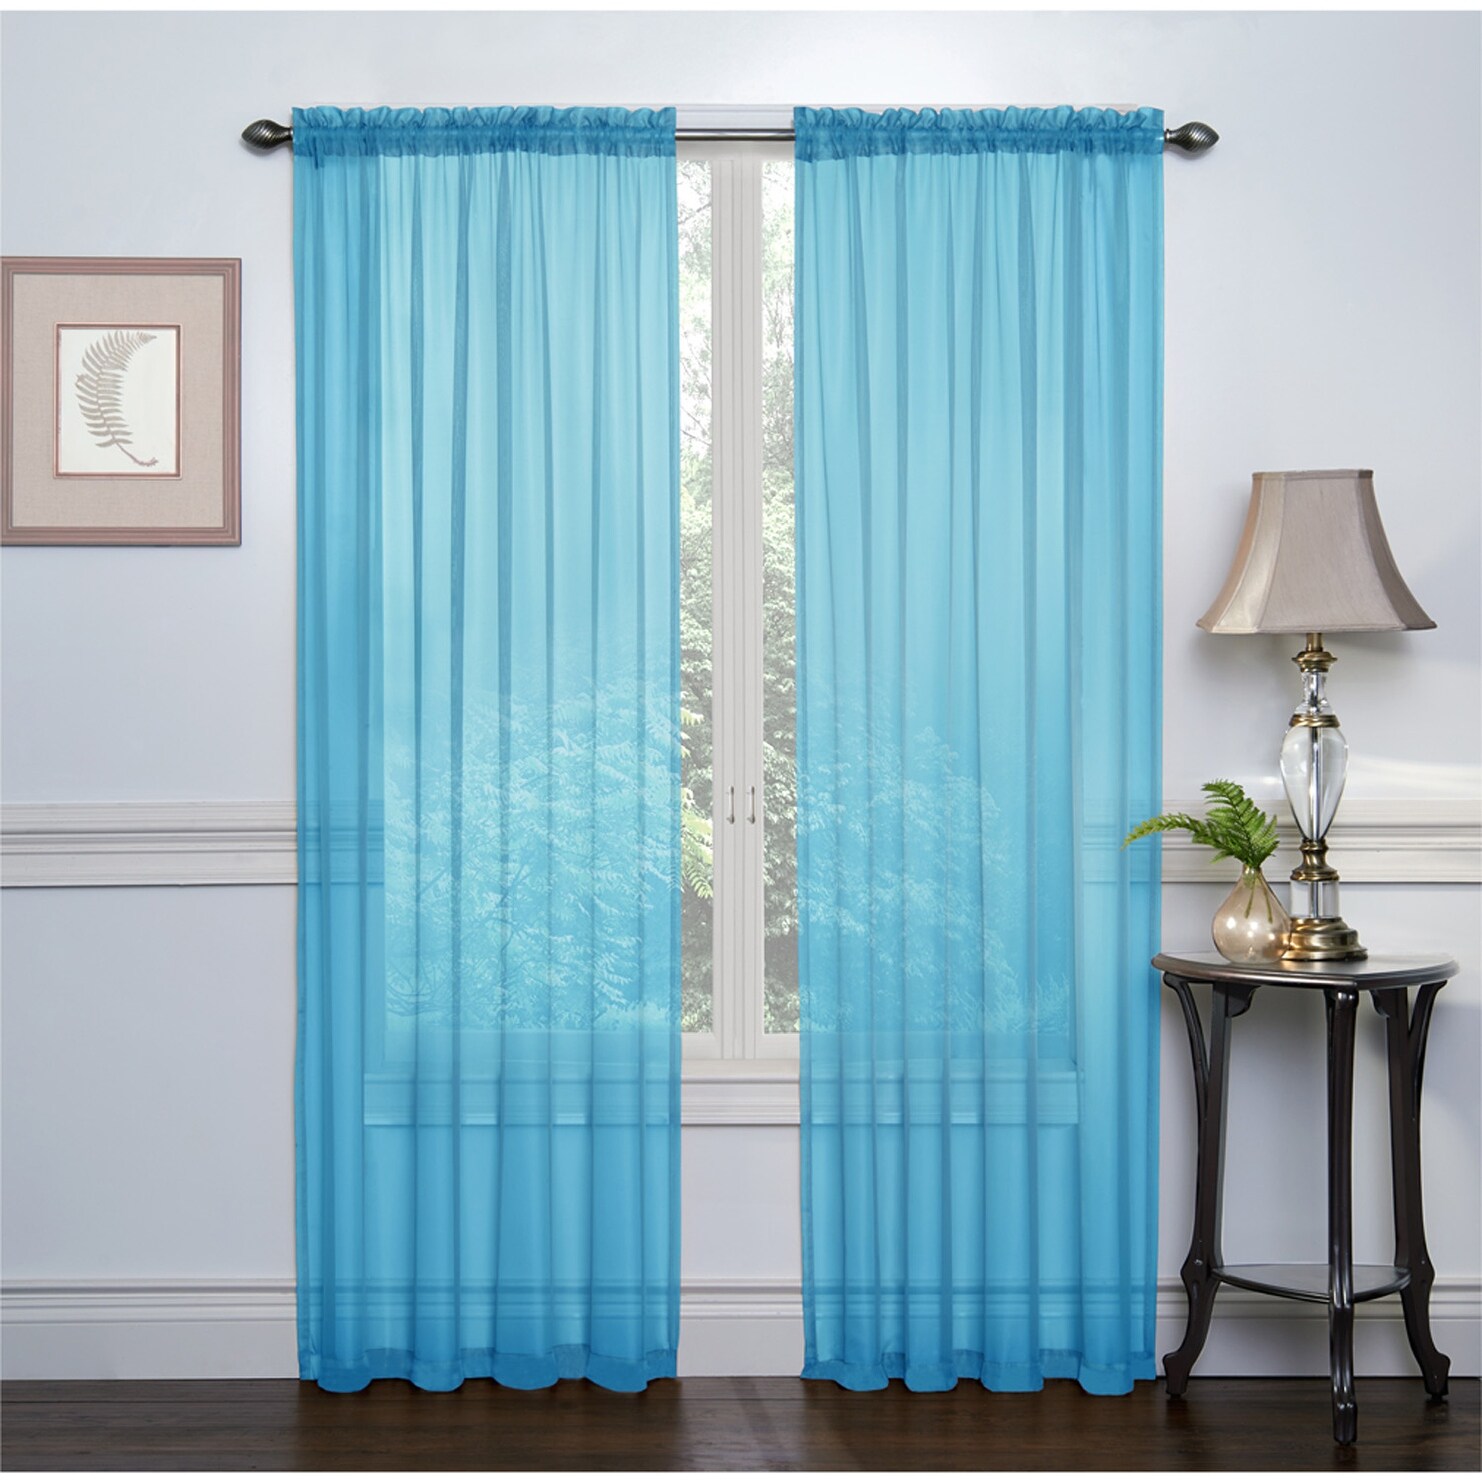  Sheer Curtains Blue 45 Inches Embroidered Wave Diamond